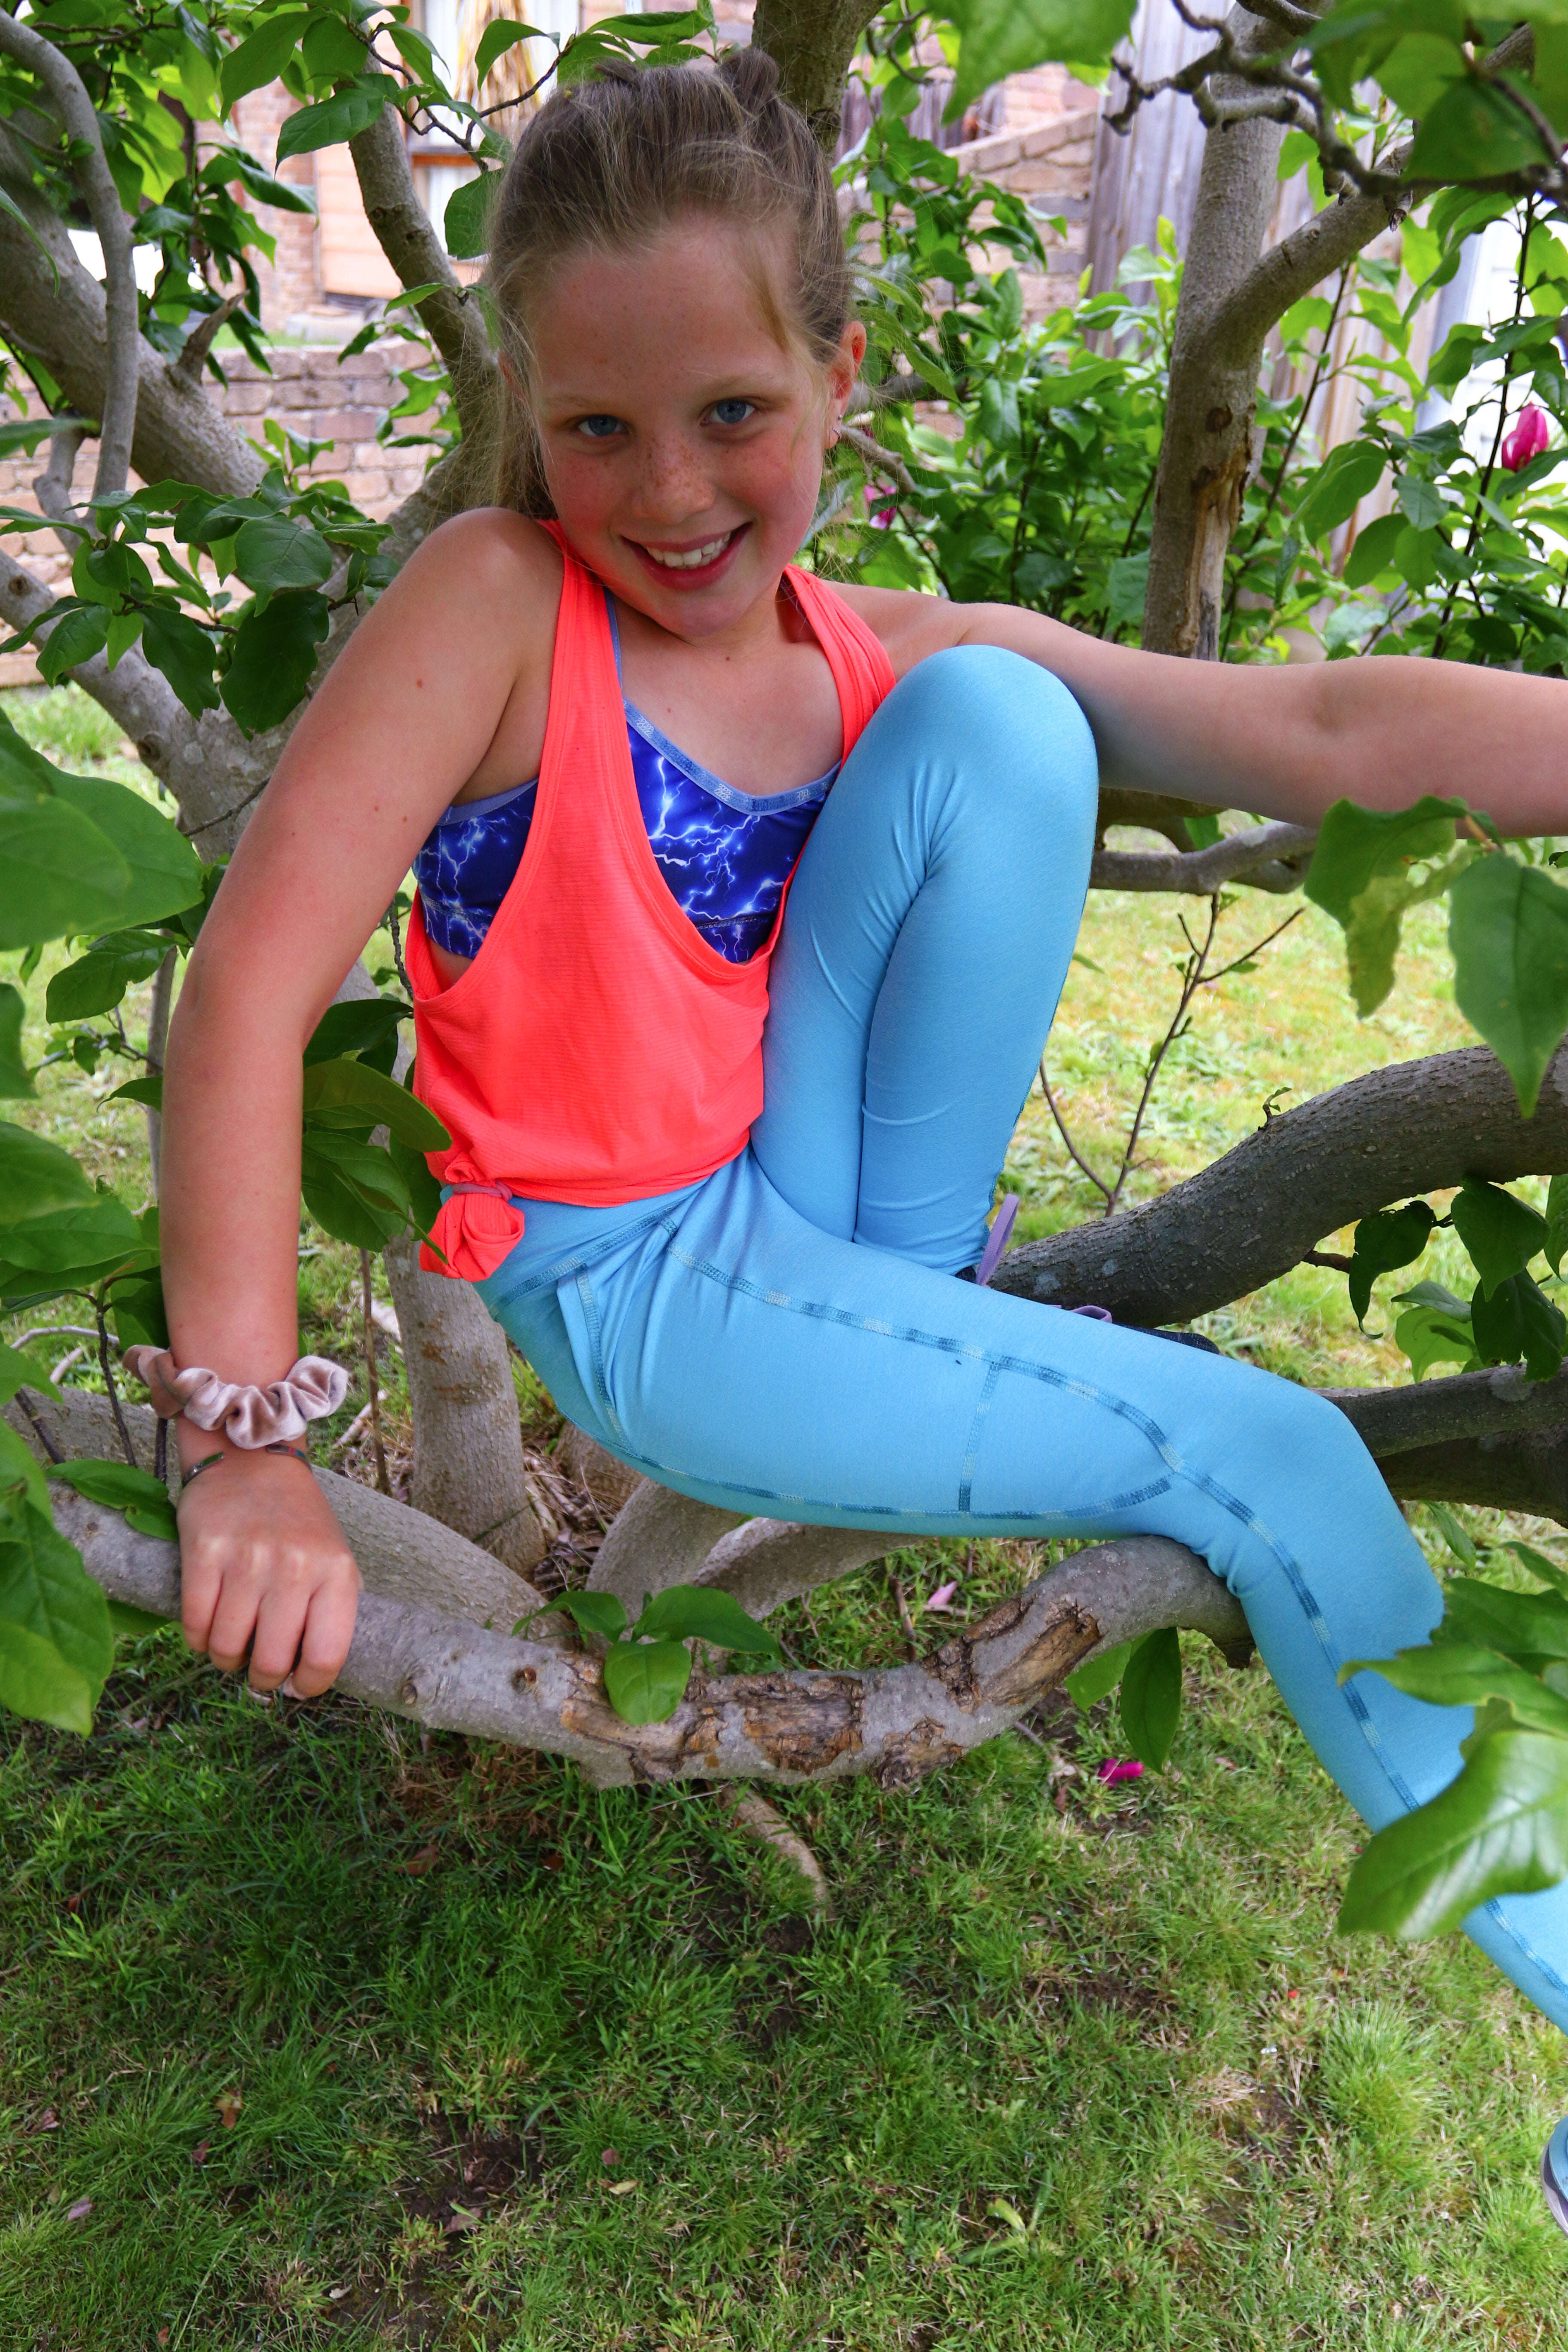 Youth Novello Leggings Sewing Pattern in Sizes 3 to 14